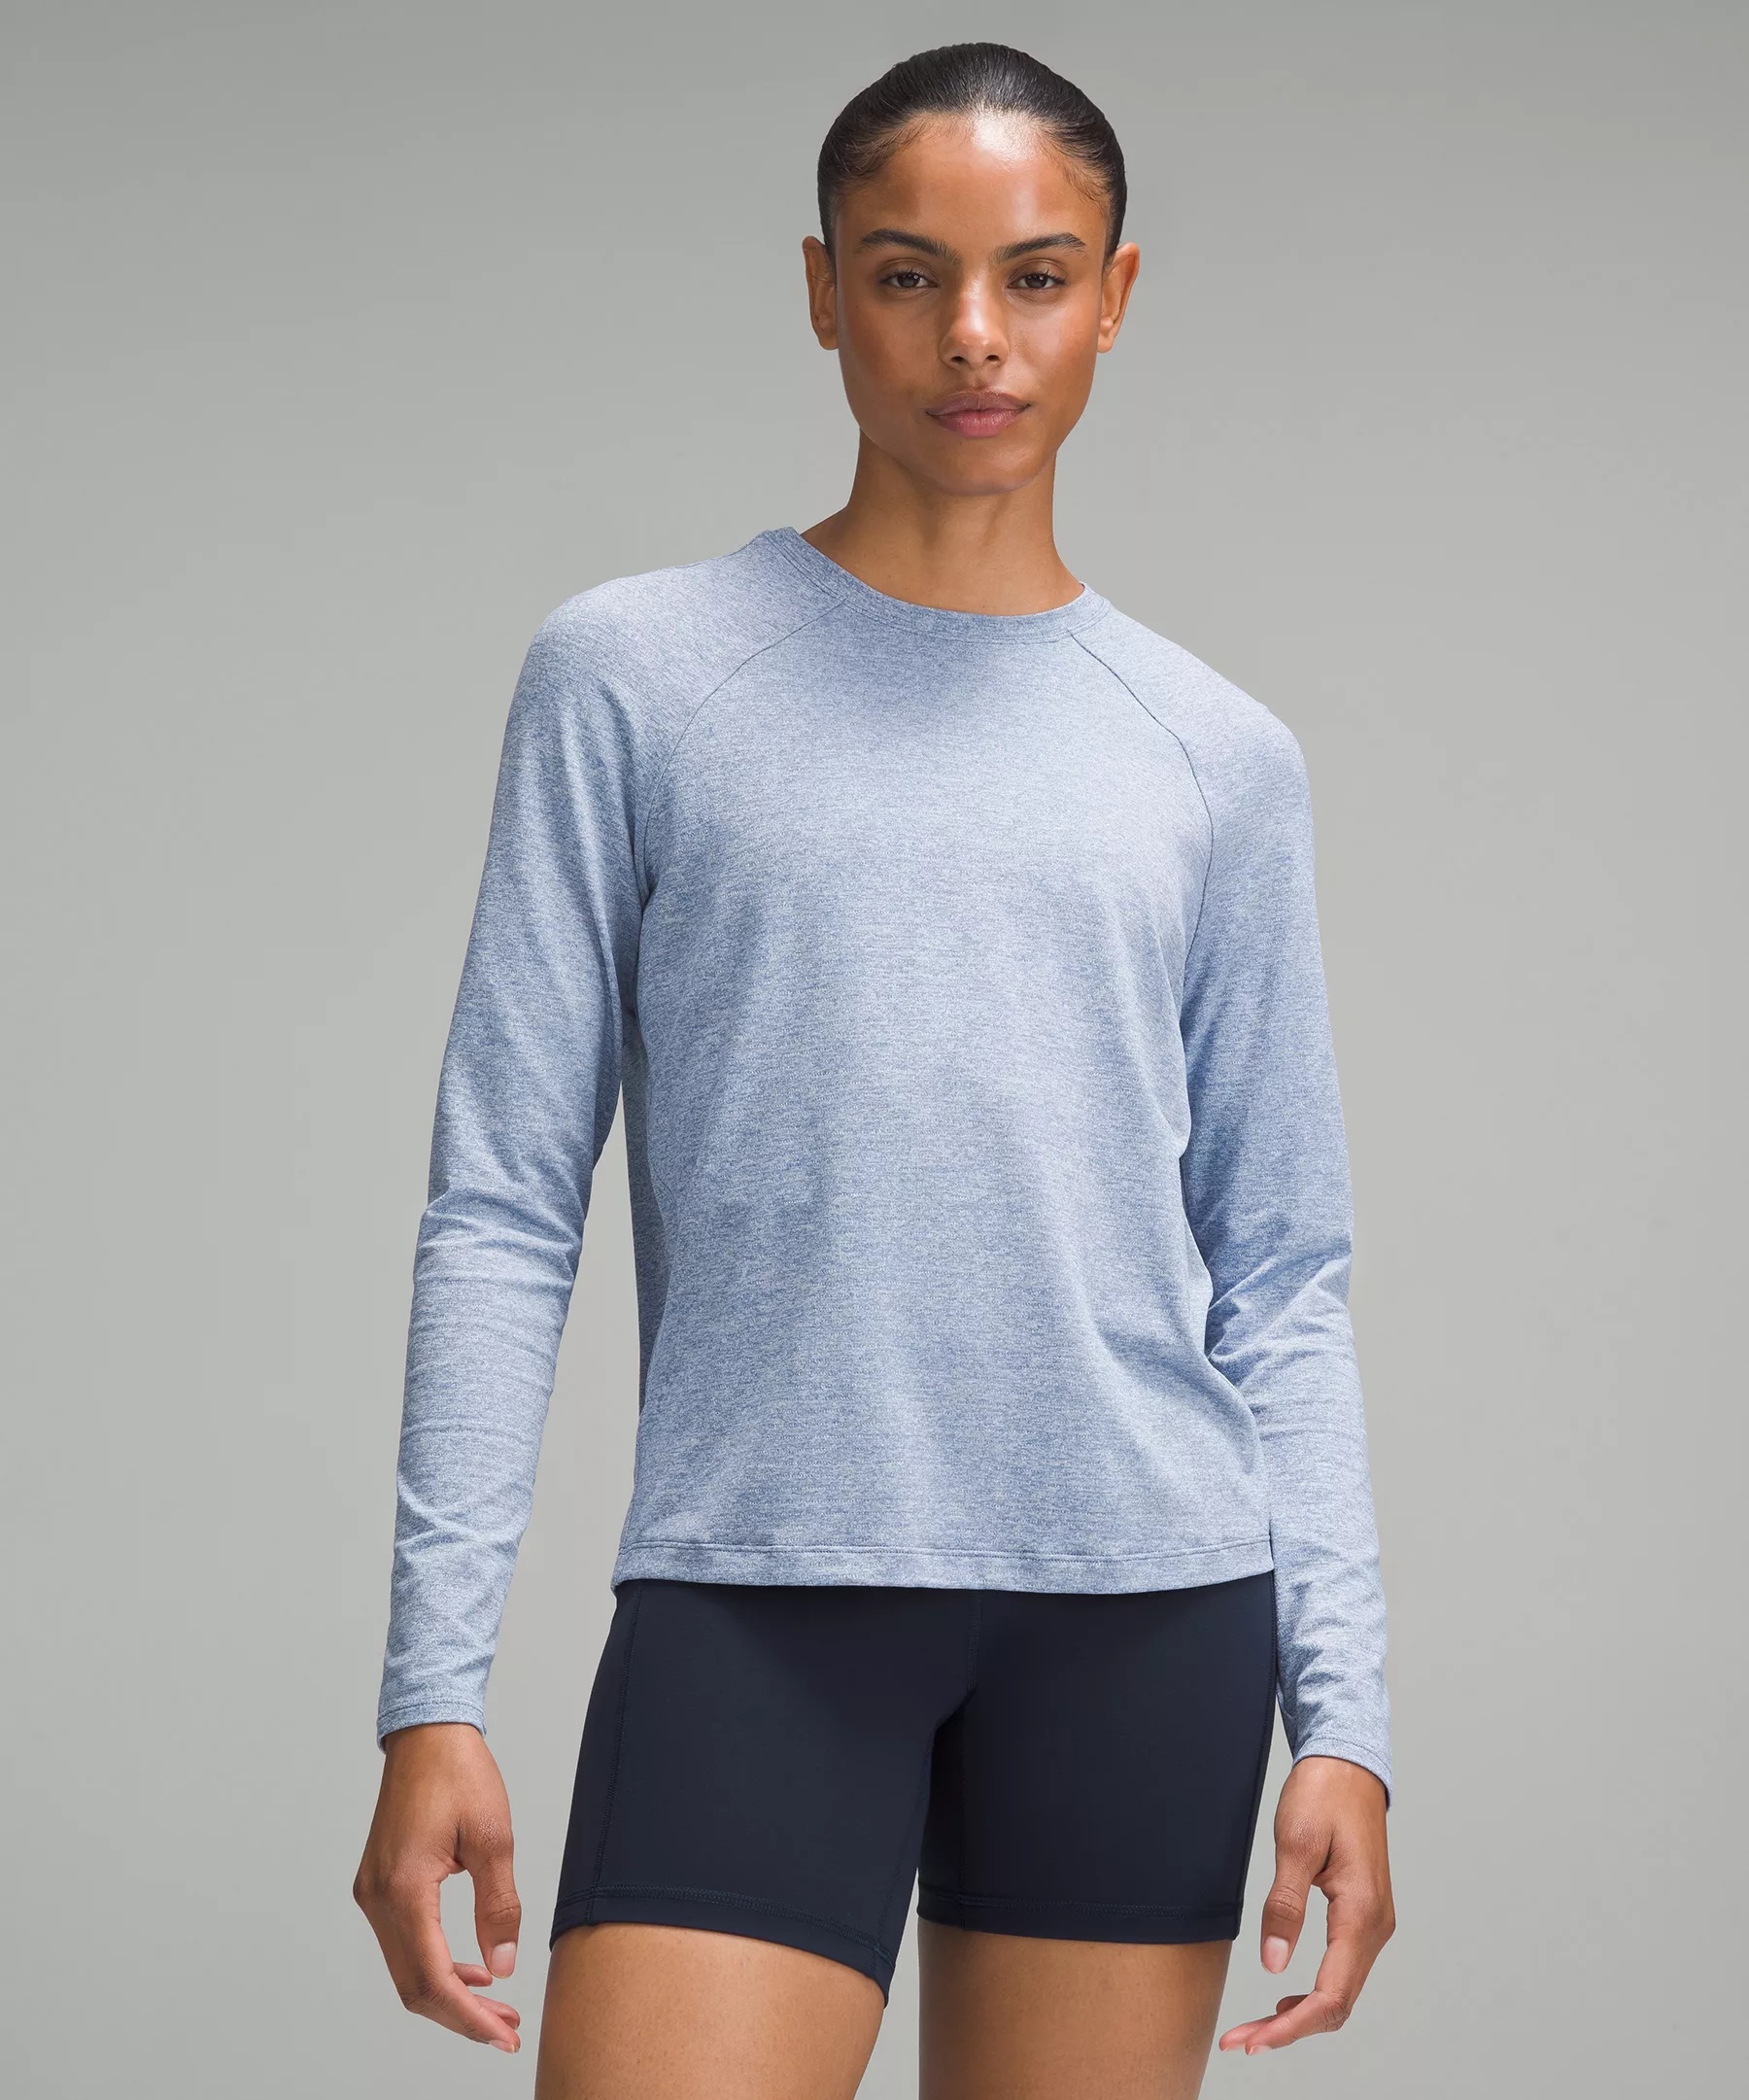 License to Train Classic-Fit Long-Sleeve Shirt - 1